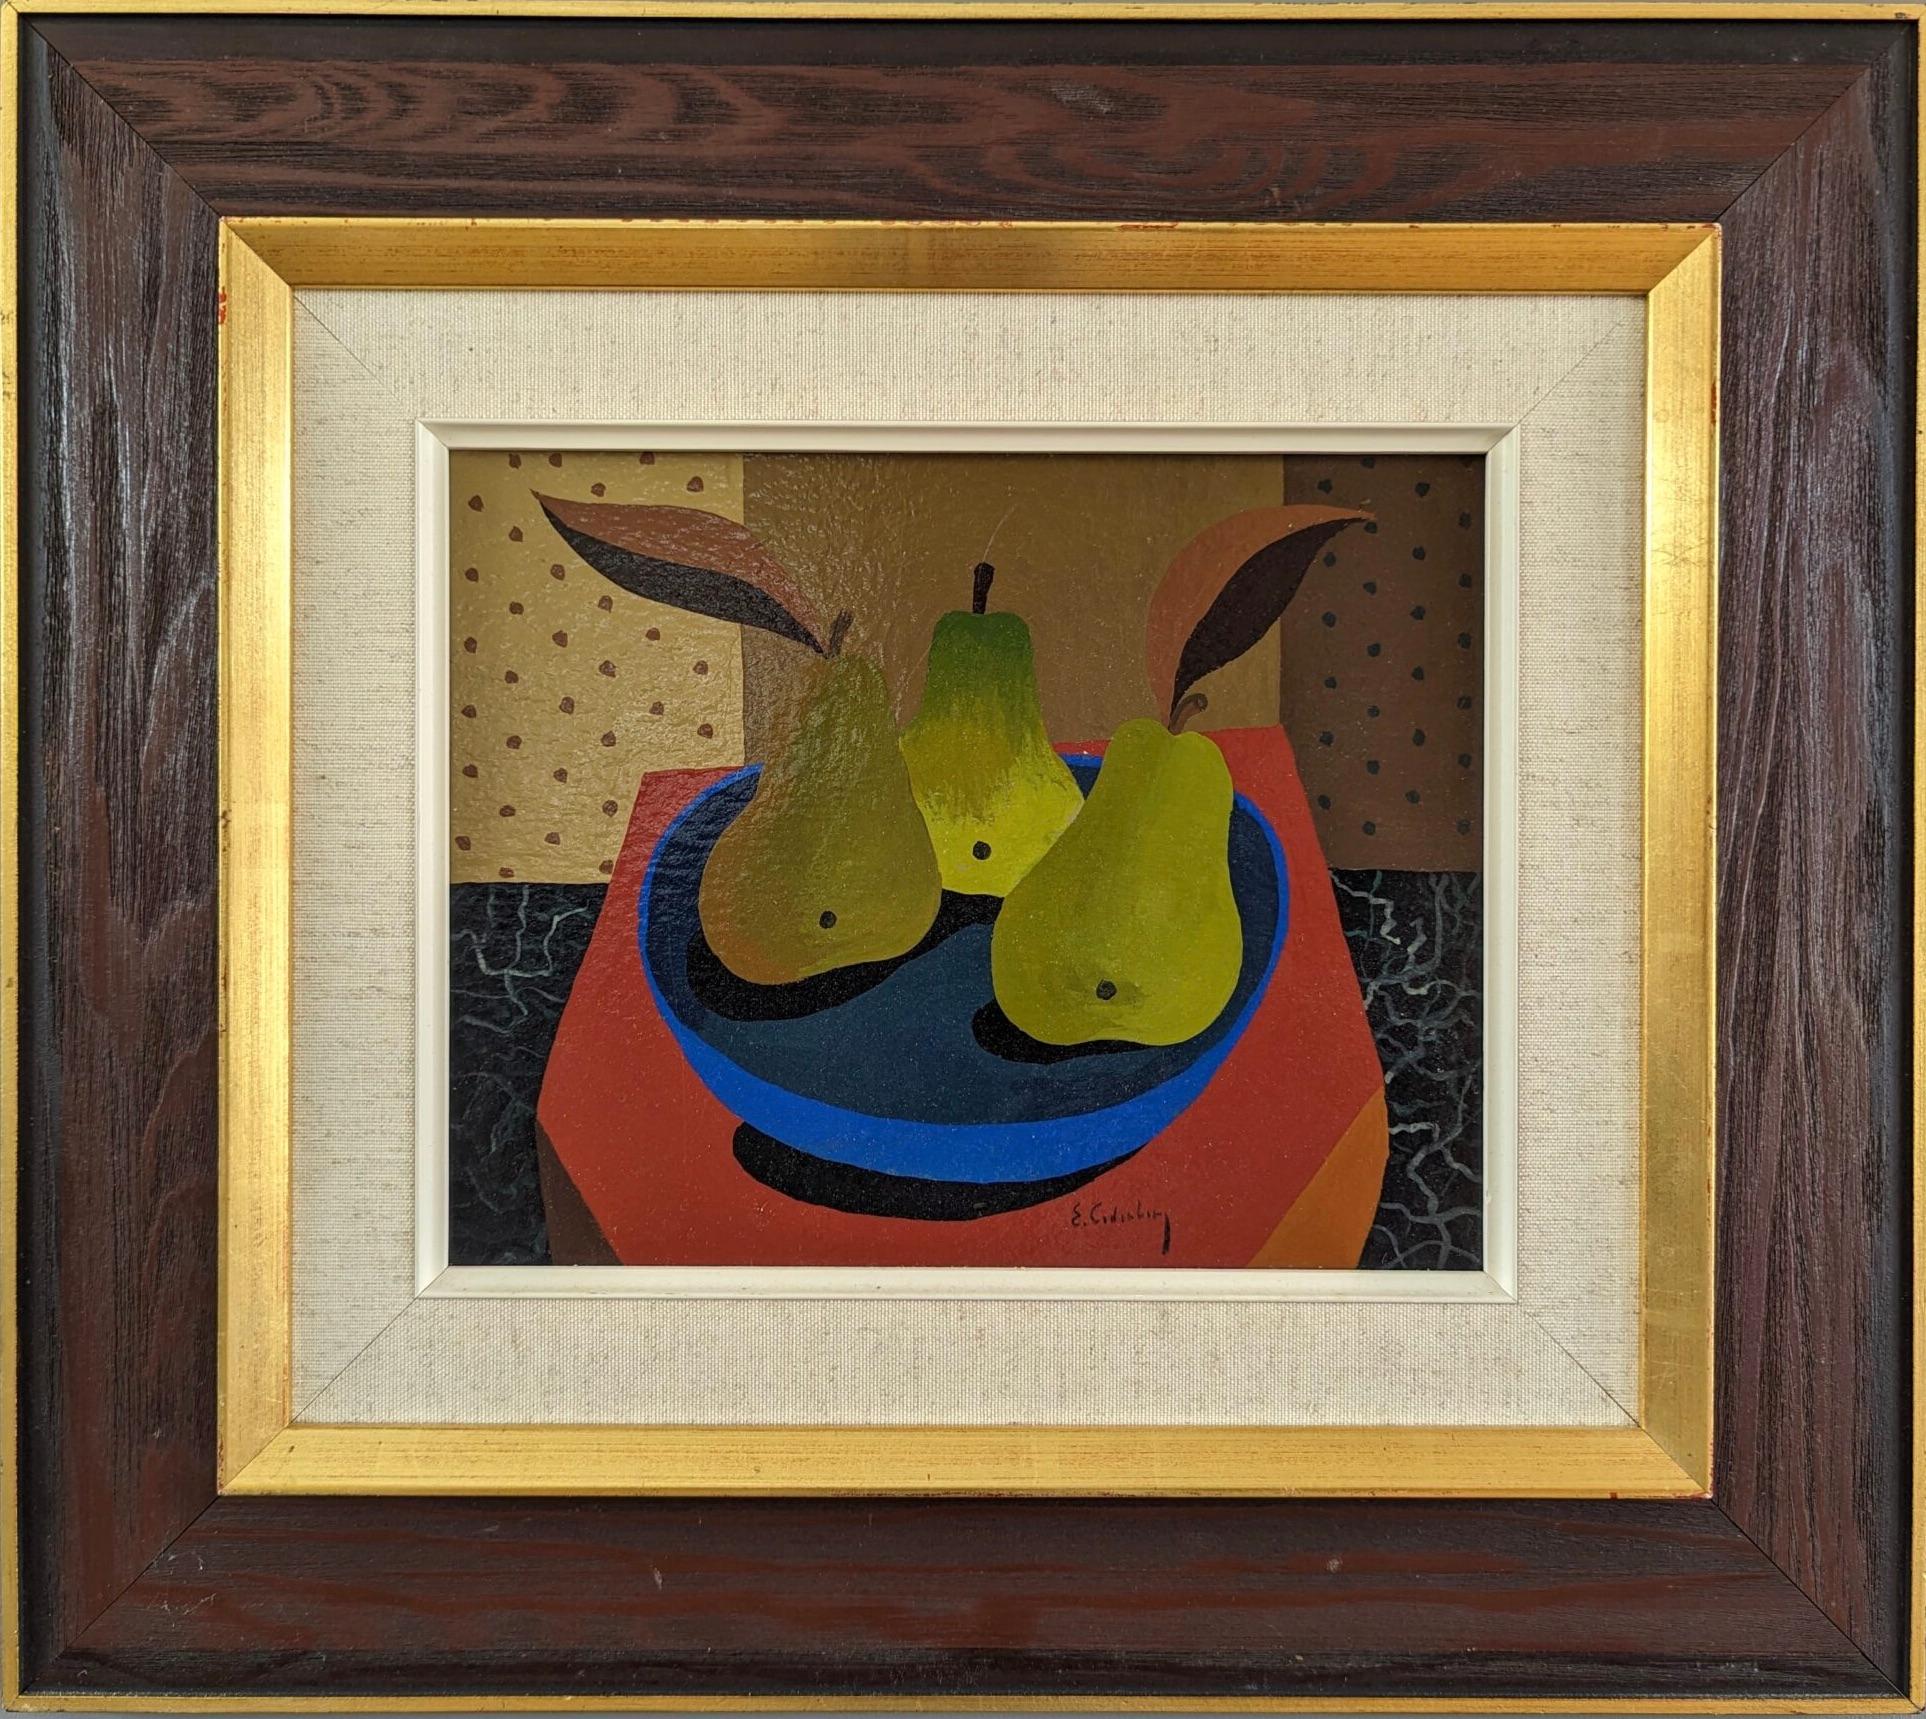 PEARS IN A BOWL
Tempera on Board
41 x 46 cm (including frame)

A brilliantly executed mid-century still life painting in tempera, painted by the established Swedish artist Eric Cederberg (1897-1984), whose artworks have been represented in several